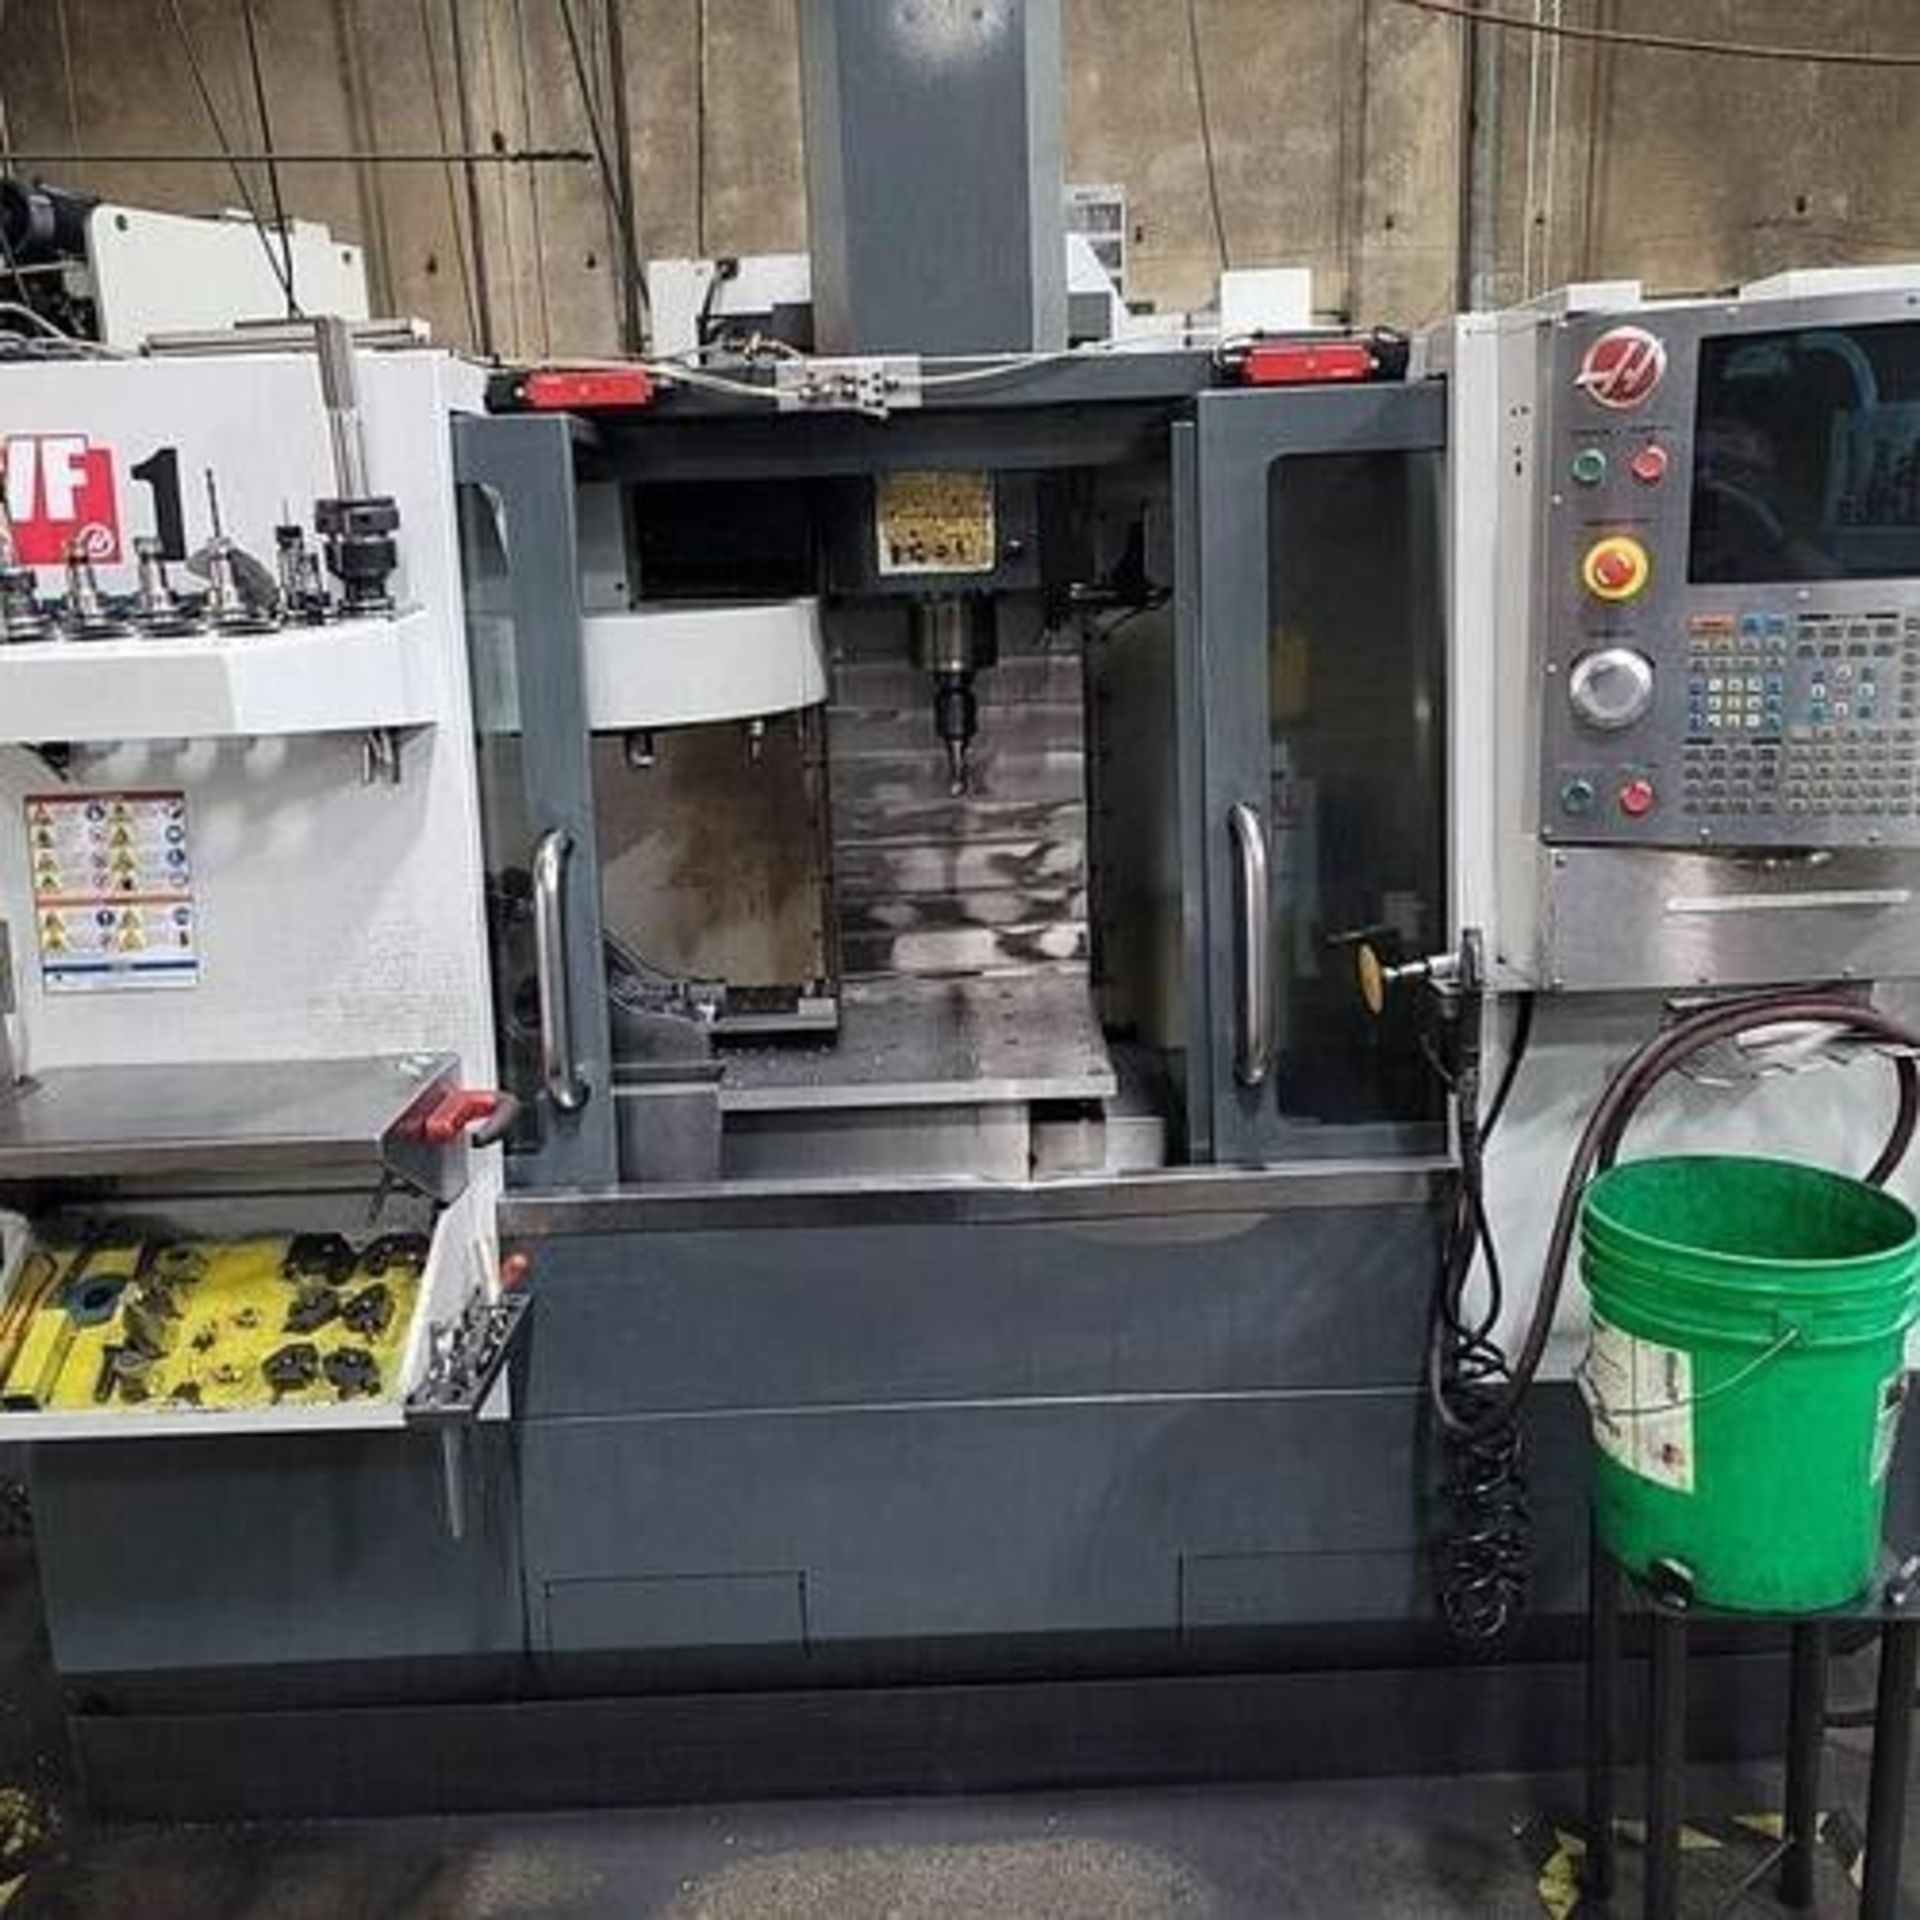 2012 HAAS VF-1 CNC Vertical Machining Center - Image 2 of 10